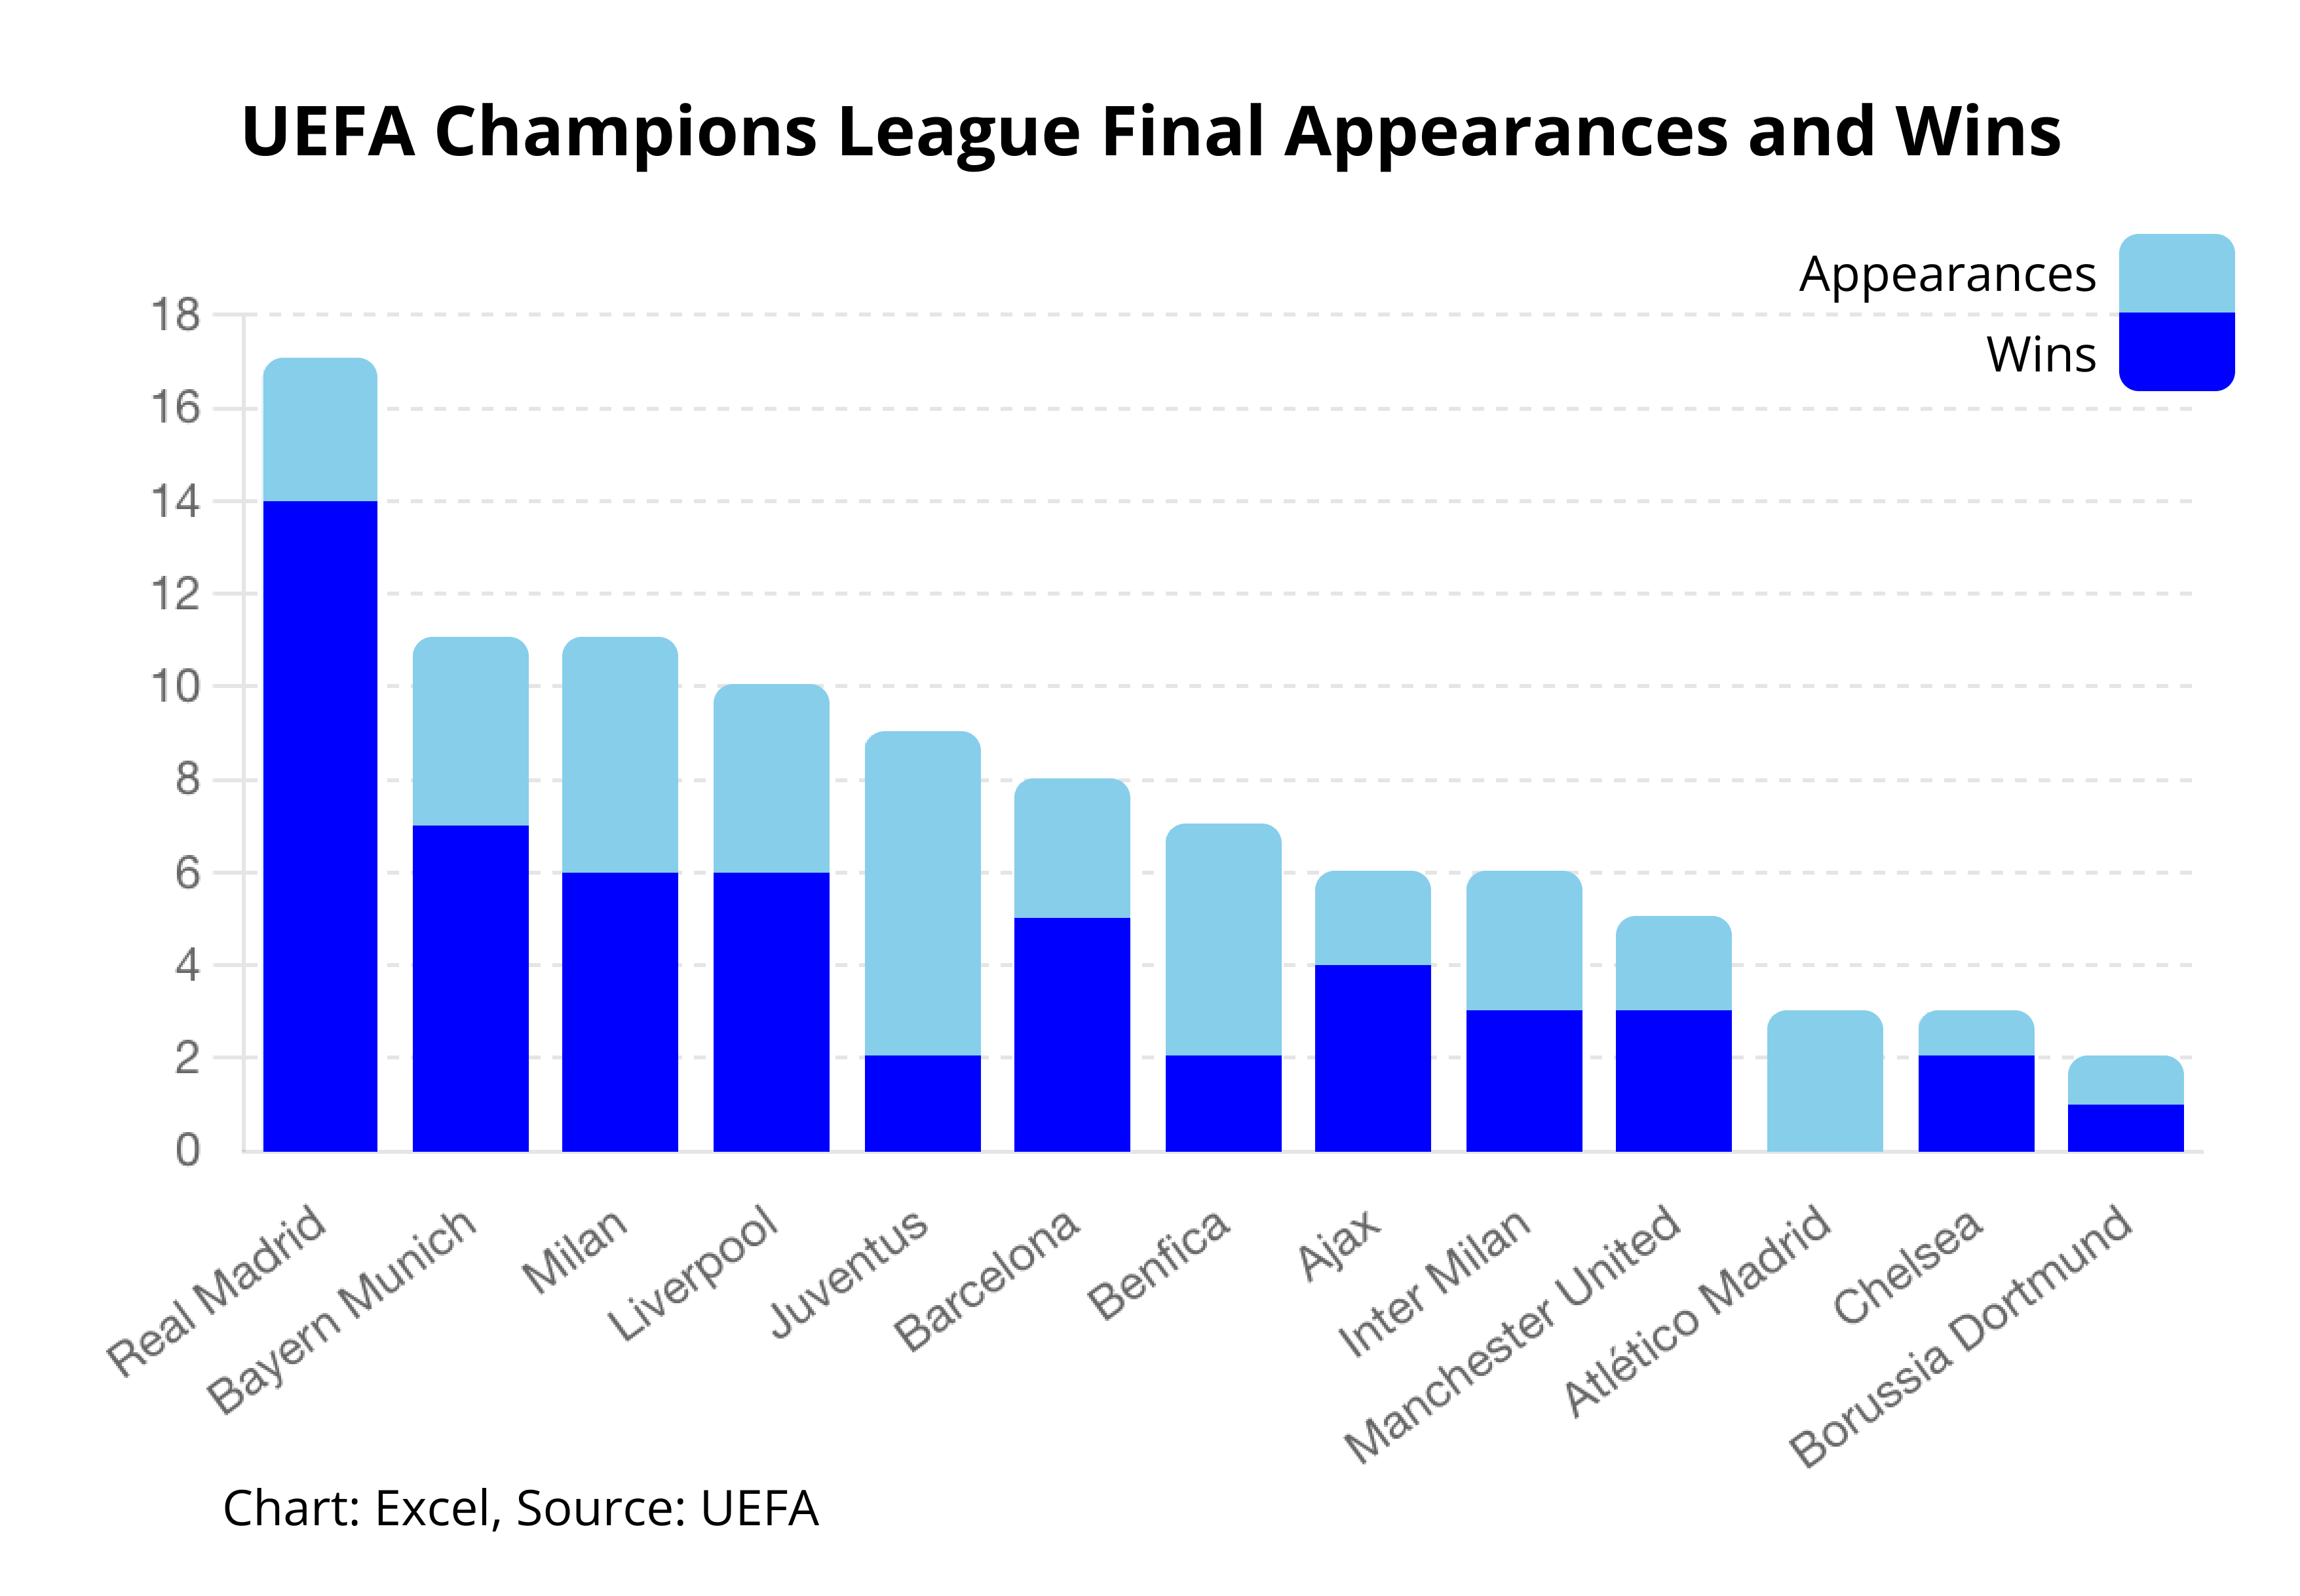 UEFA Champions League Final Appearances and Wins (Real Madrid Vs